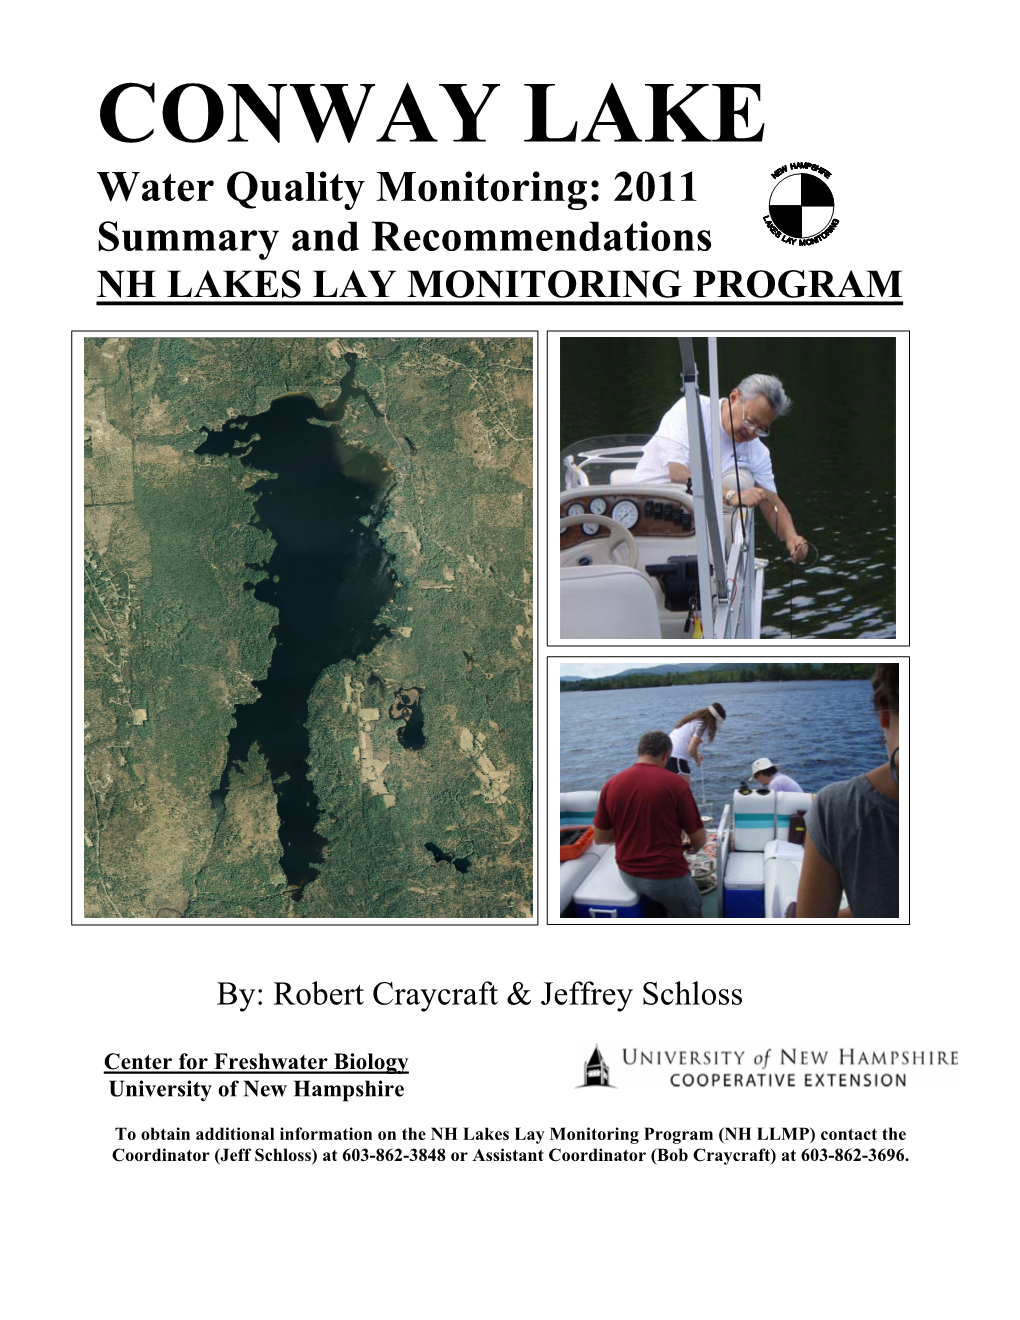 CONWAY LAKE Water Quality Monitoring: 2011 Summary and Recommendations NH LAKES LAY MONITORING PROGRAM